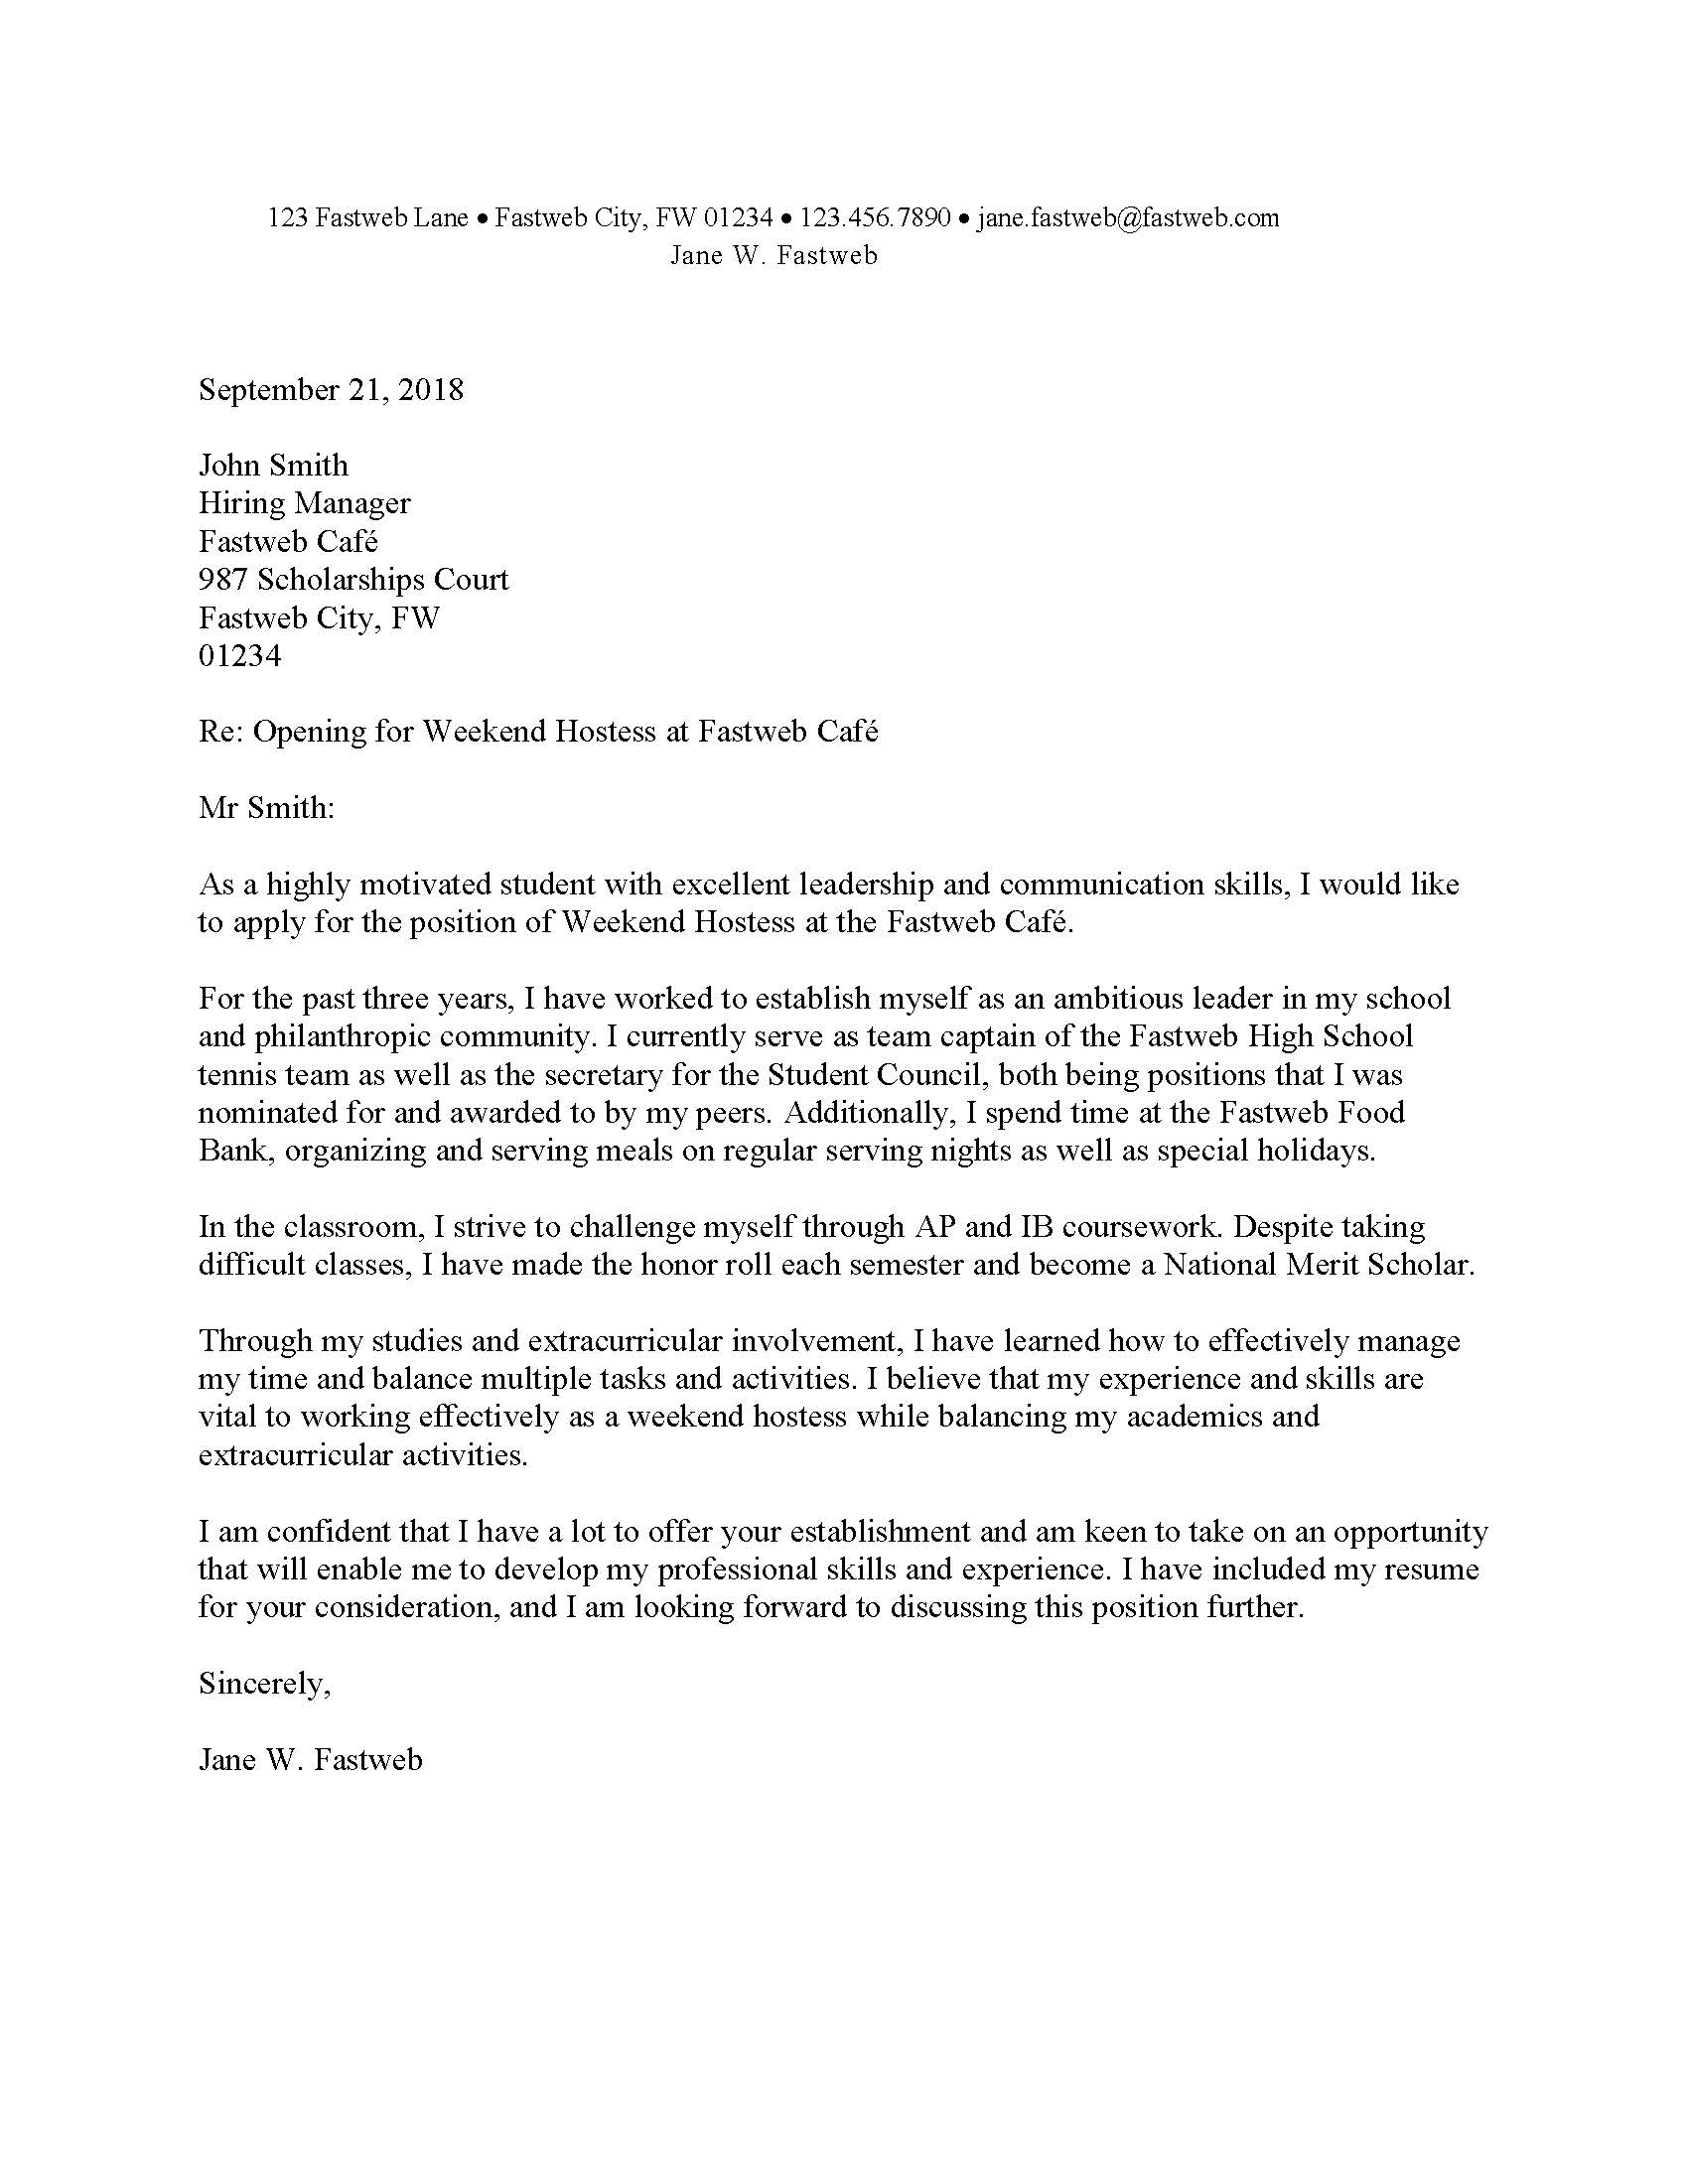 job application letter for the first time